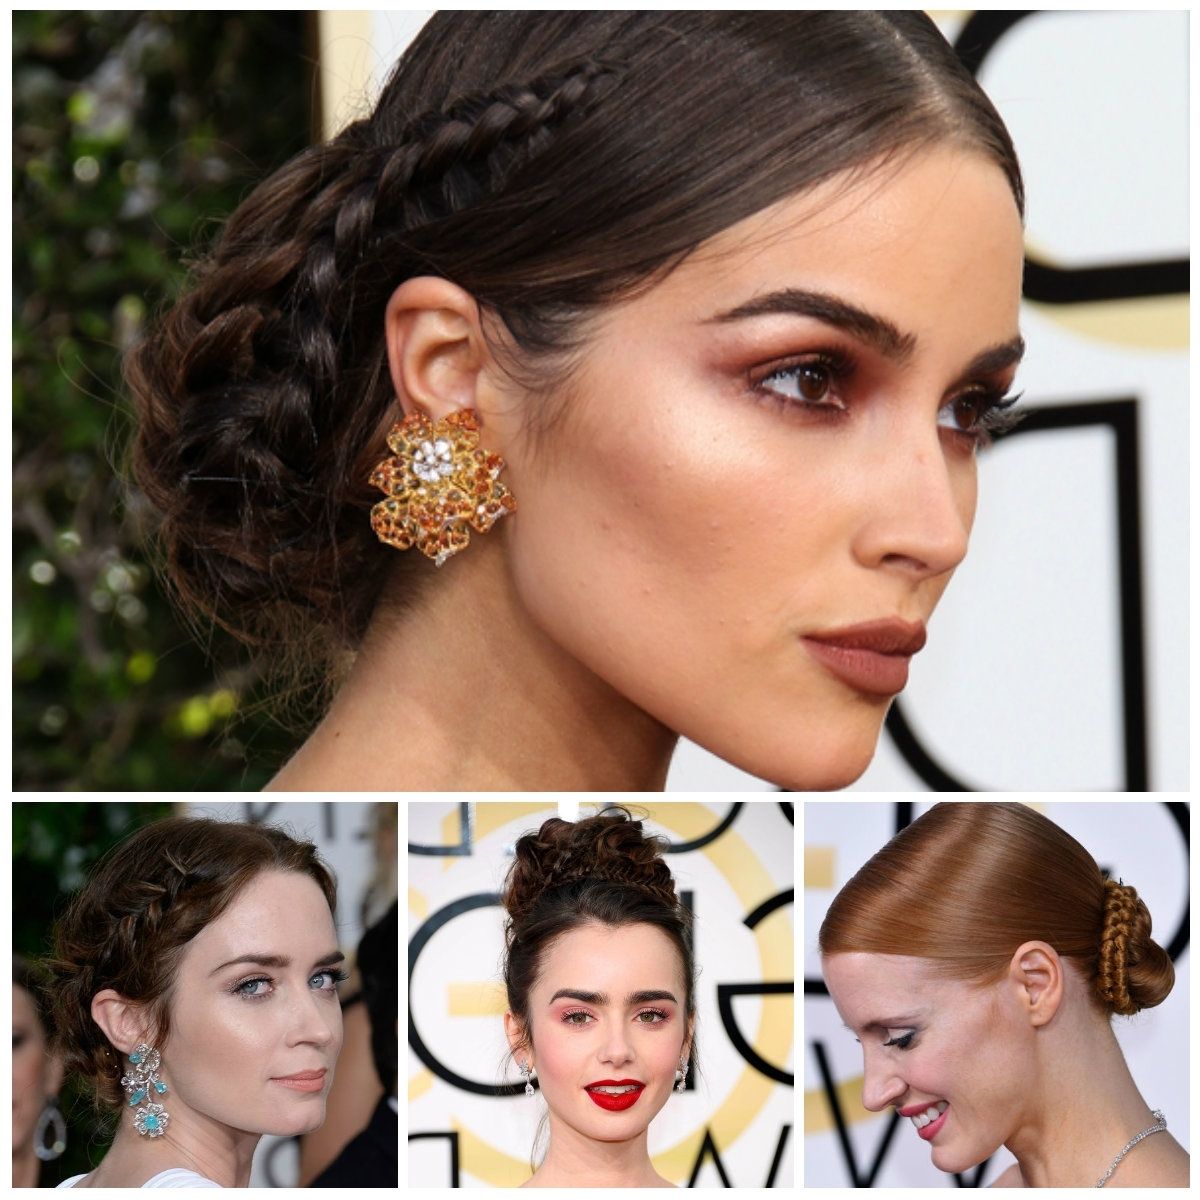 2017 Celebrity Braided Updo Hairstyles For Prom – New Hairstyles Inside Preferred Celebrities Braided Hairstyles (View 5 of 15)